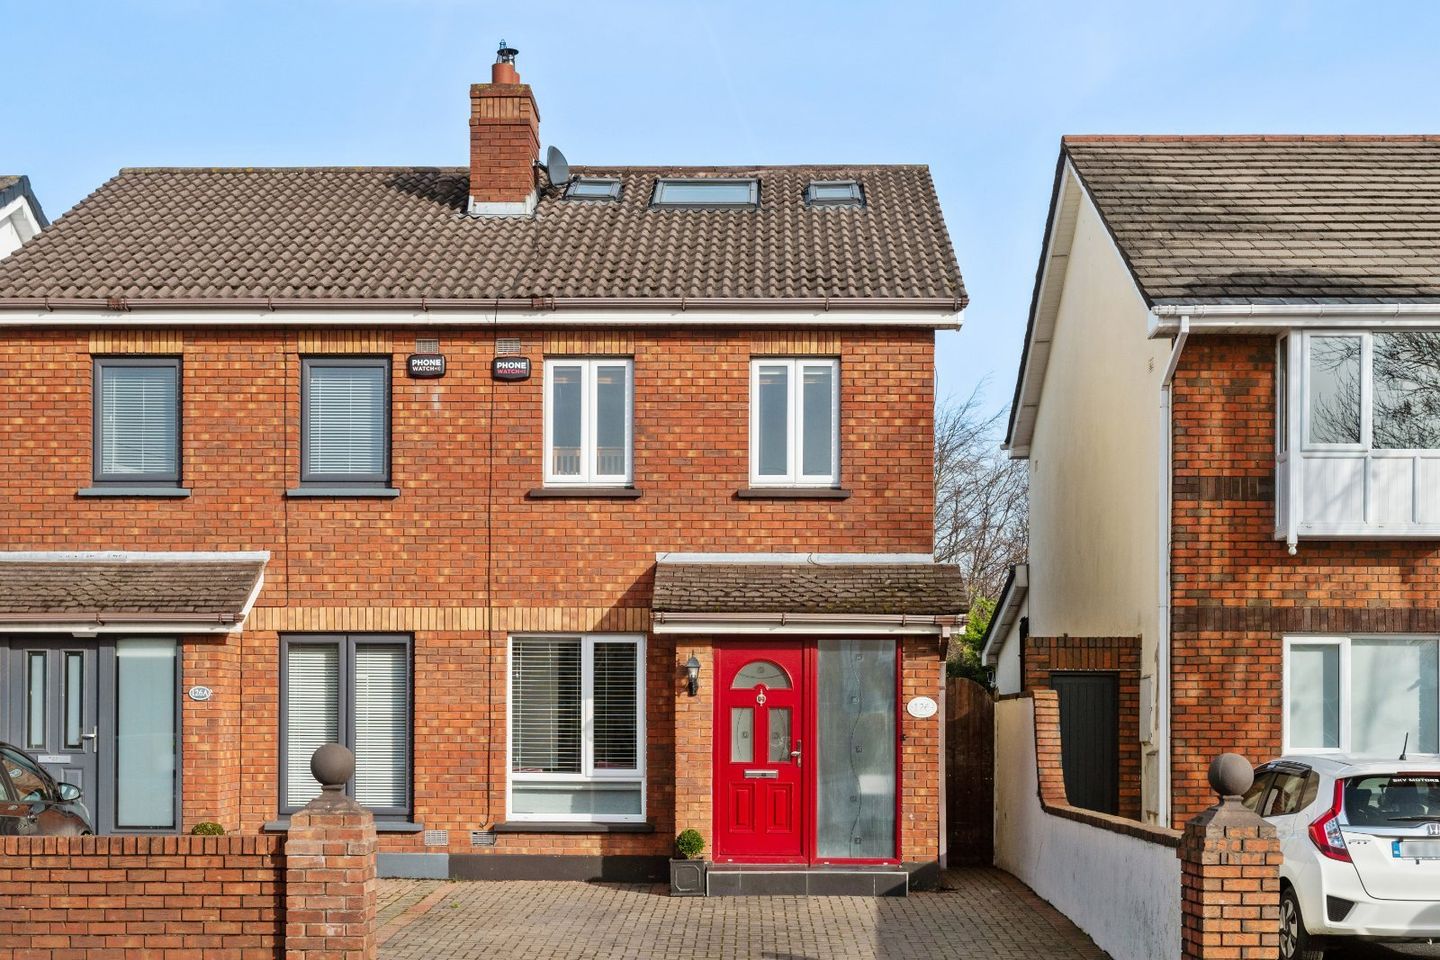 126 Kimmage Road West, Kimmage, Dublin 12, D12RC81